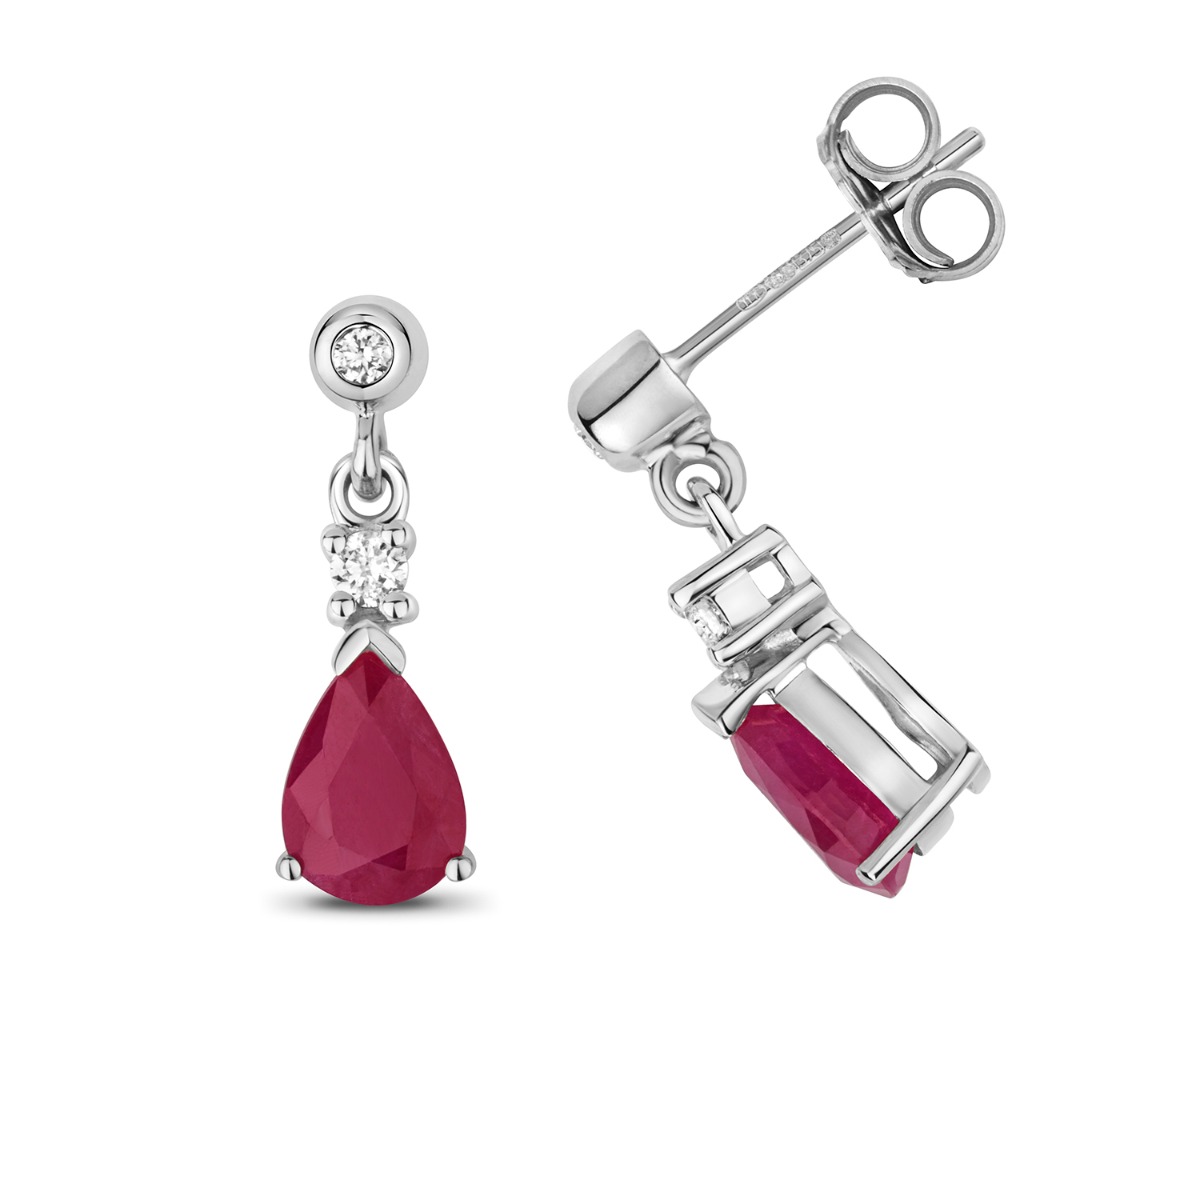 9ct White Gold Illusion Diamond And Ruby Drop Earrings | Johnsons Jewellers